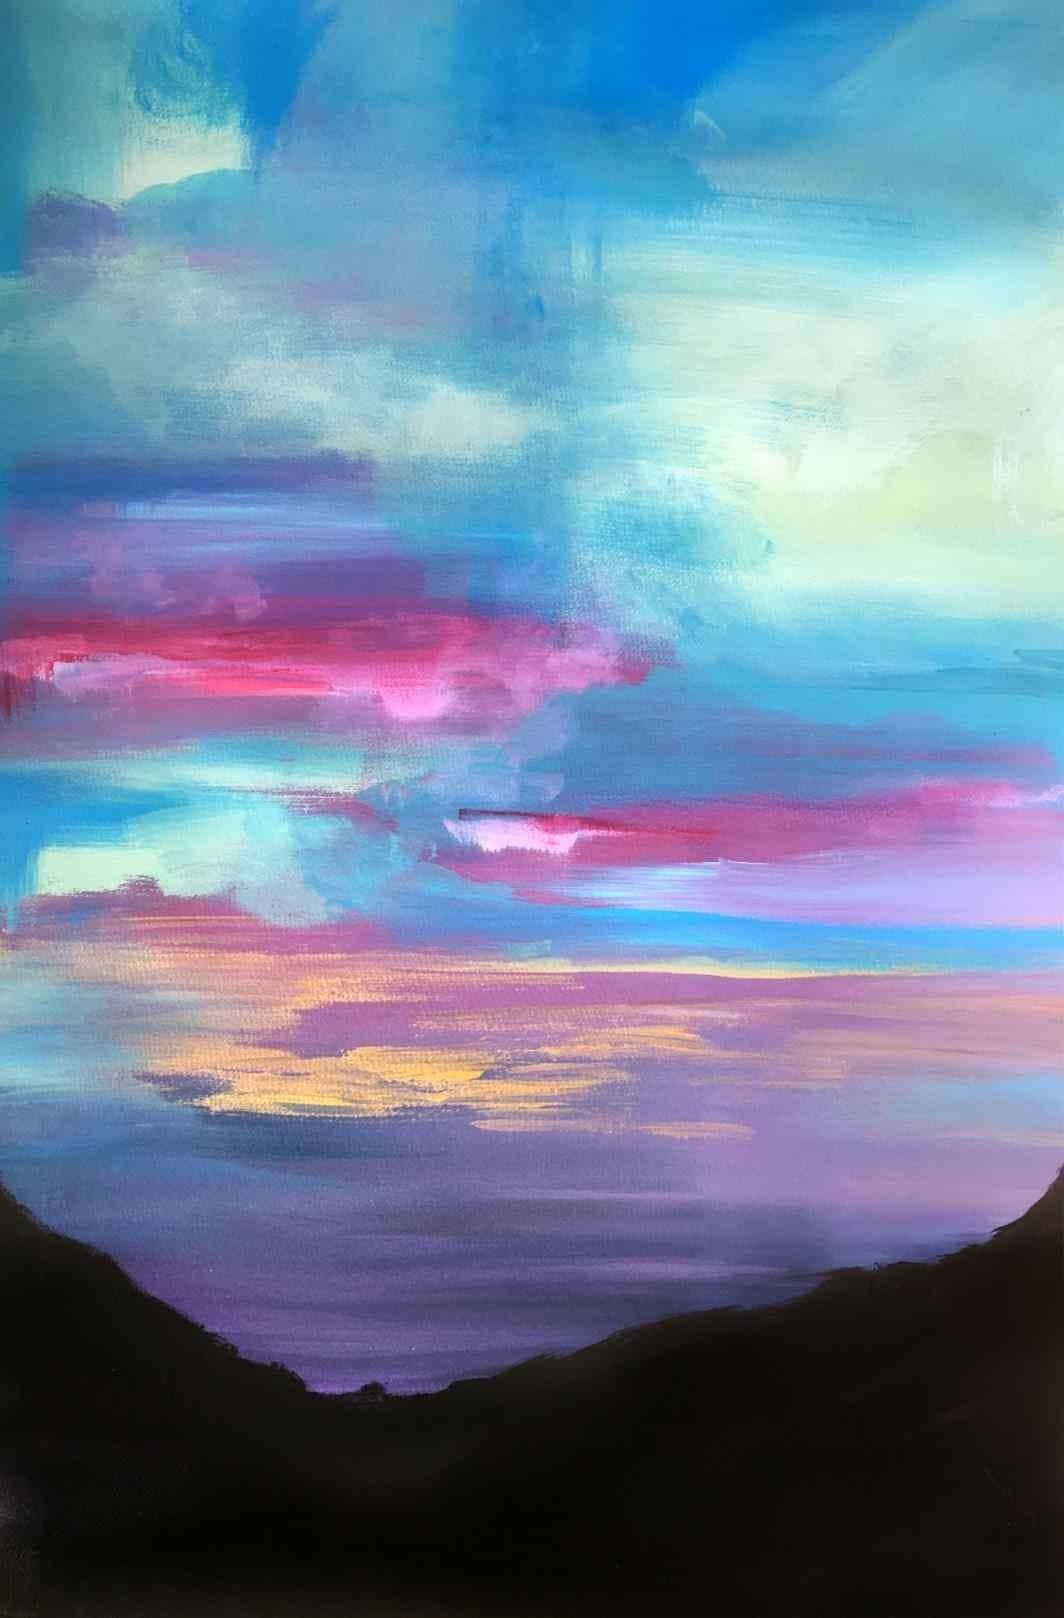 A Painting Of A Sunset With Blue And Pink Clouds